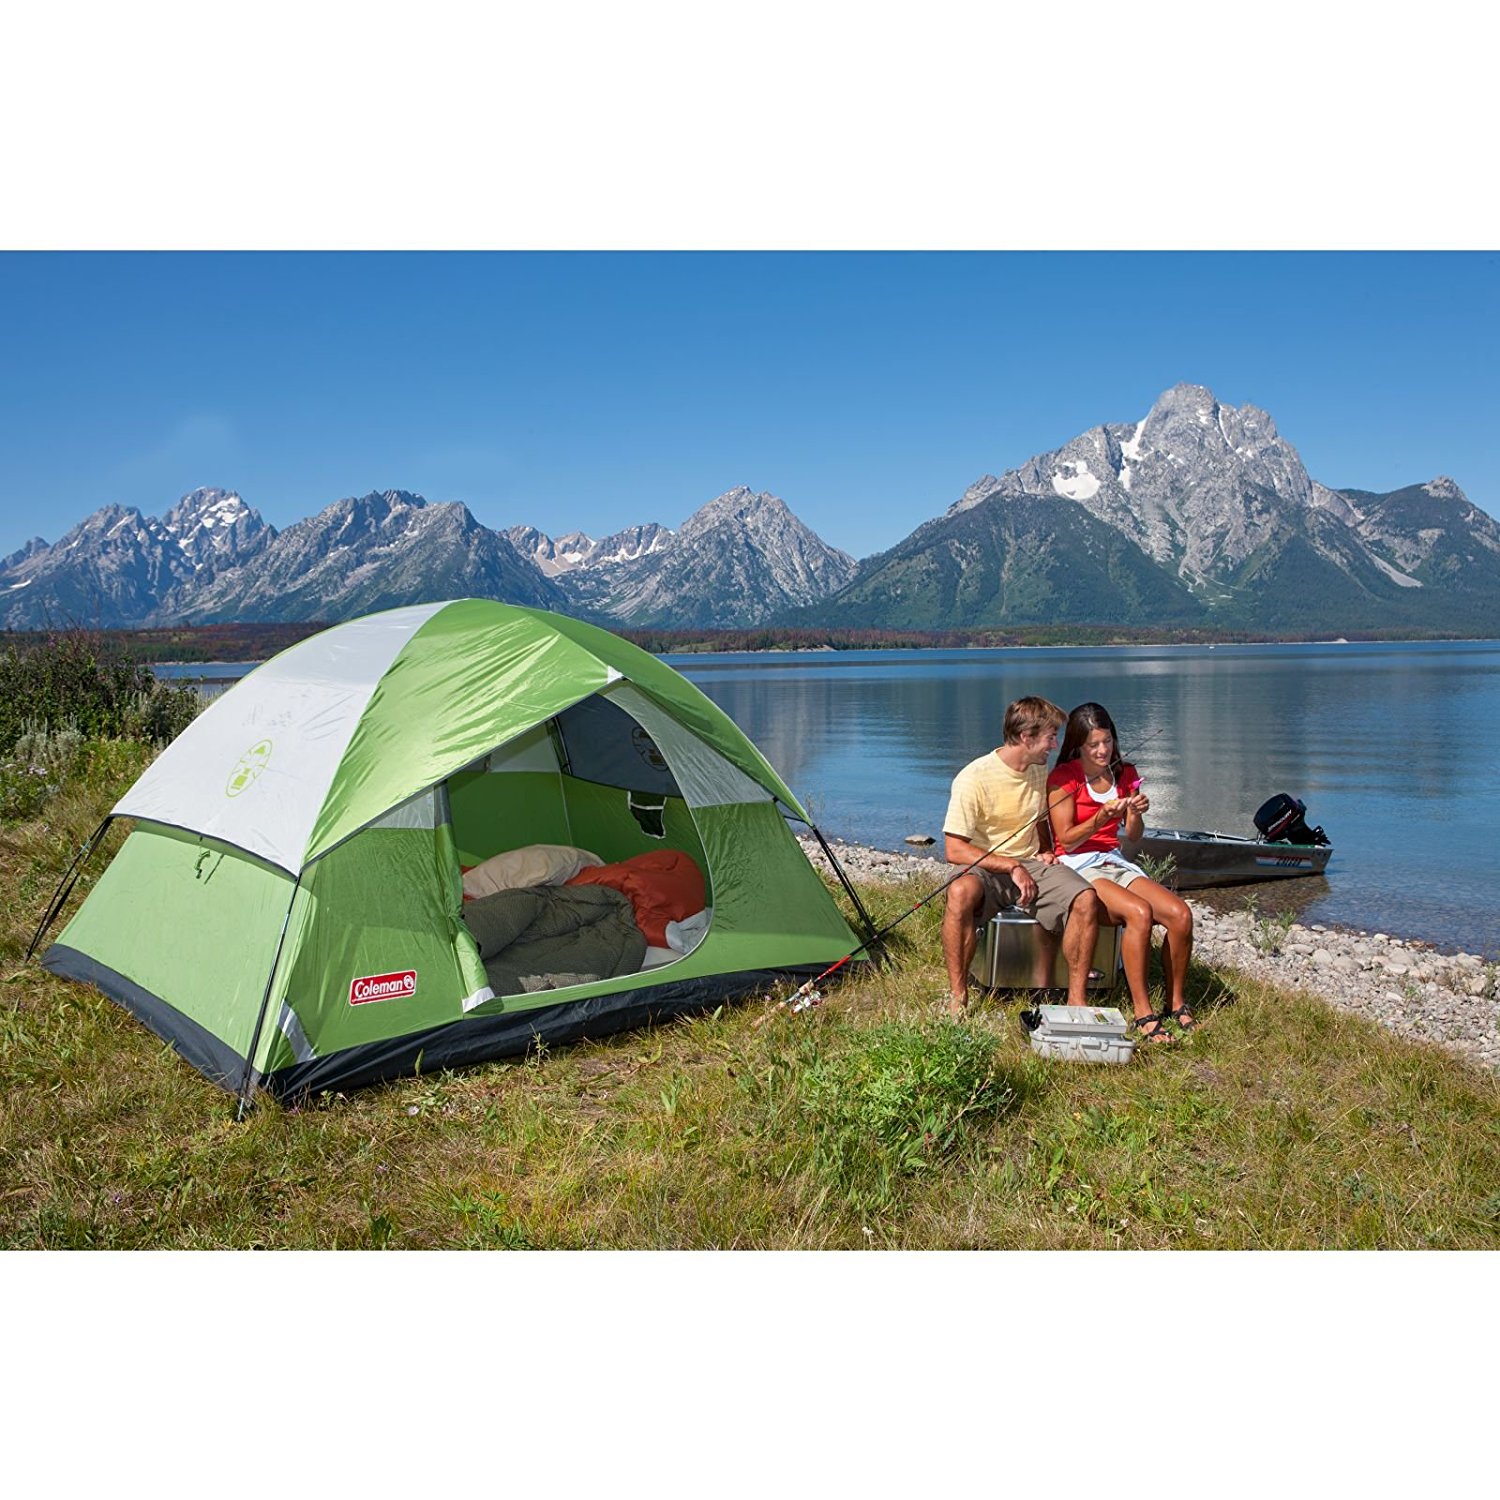 best camping accessories, best camping gear, cool camping gear, cool camping gadget, camping tools, cool camping stuff,  must have camping gadgets, new camping gear, cool outdoor gear, best camping equipment, top camping gear.